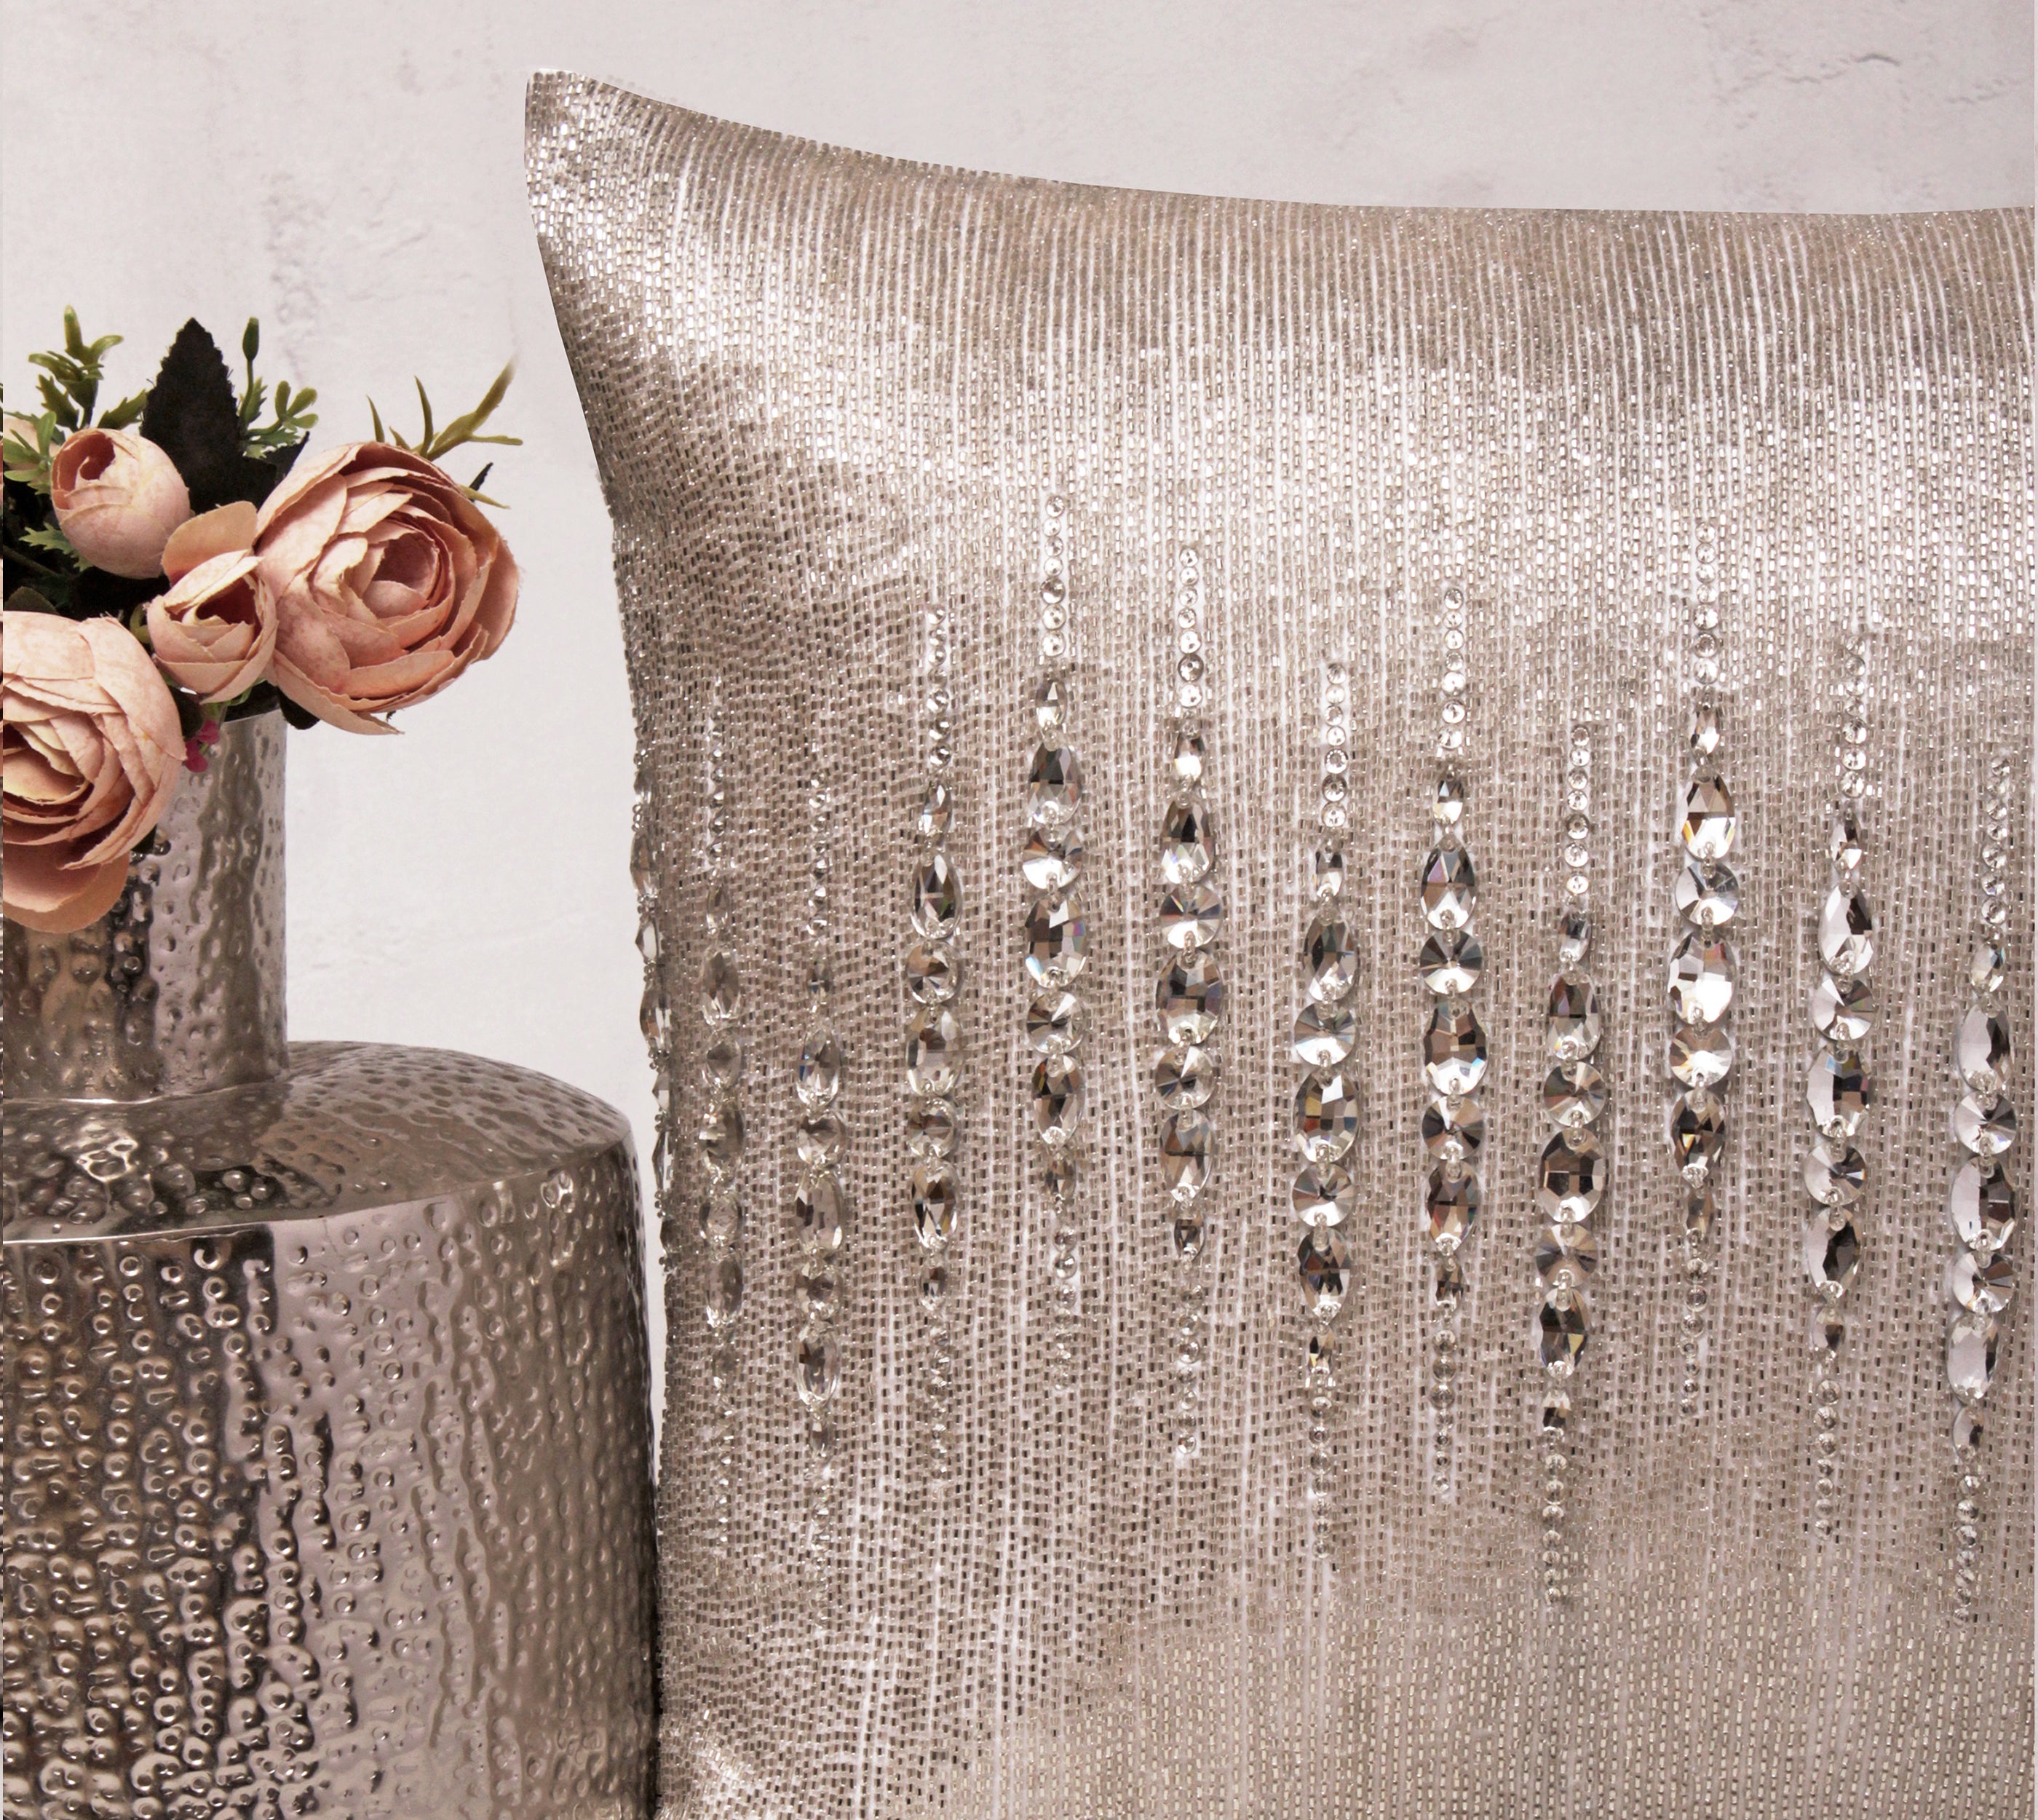 FORTUNE White and Silver Bling Cushion Cover